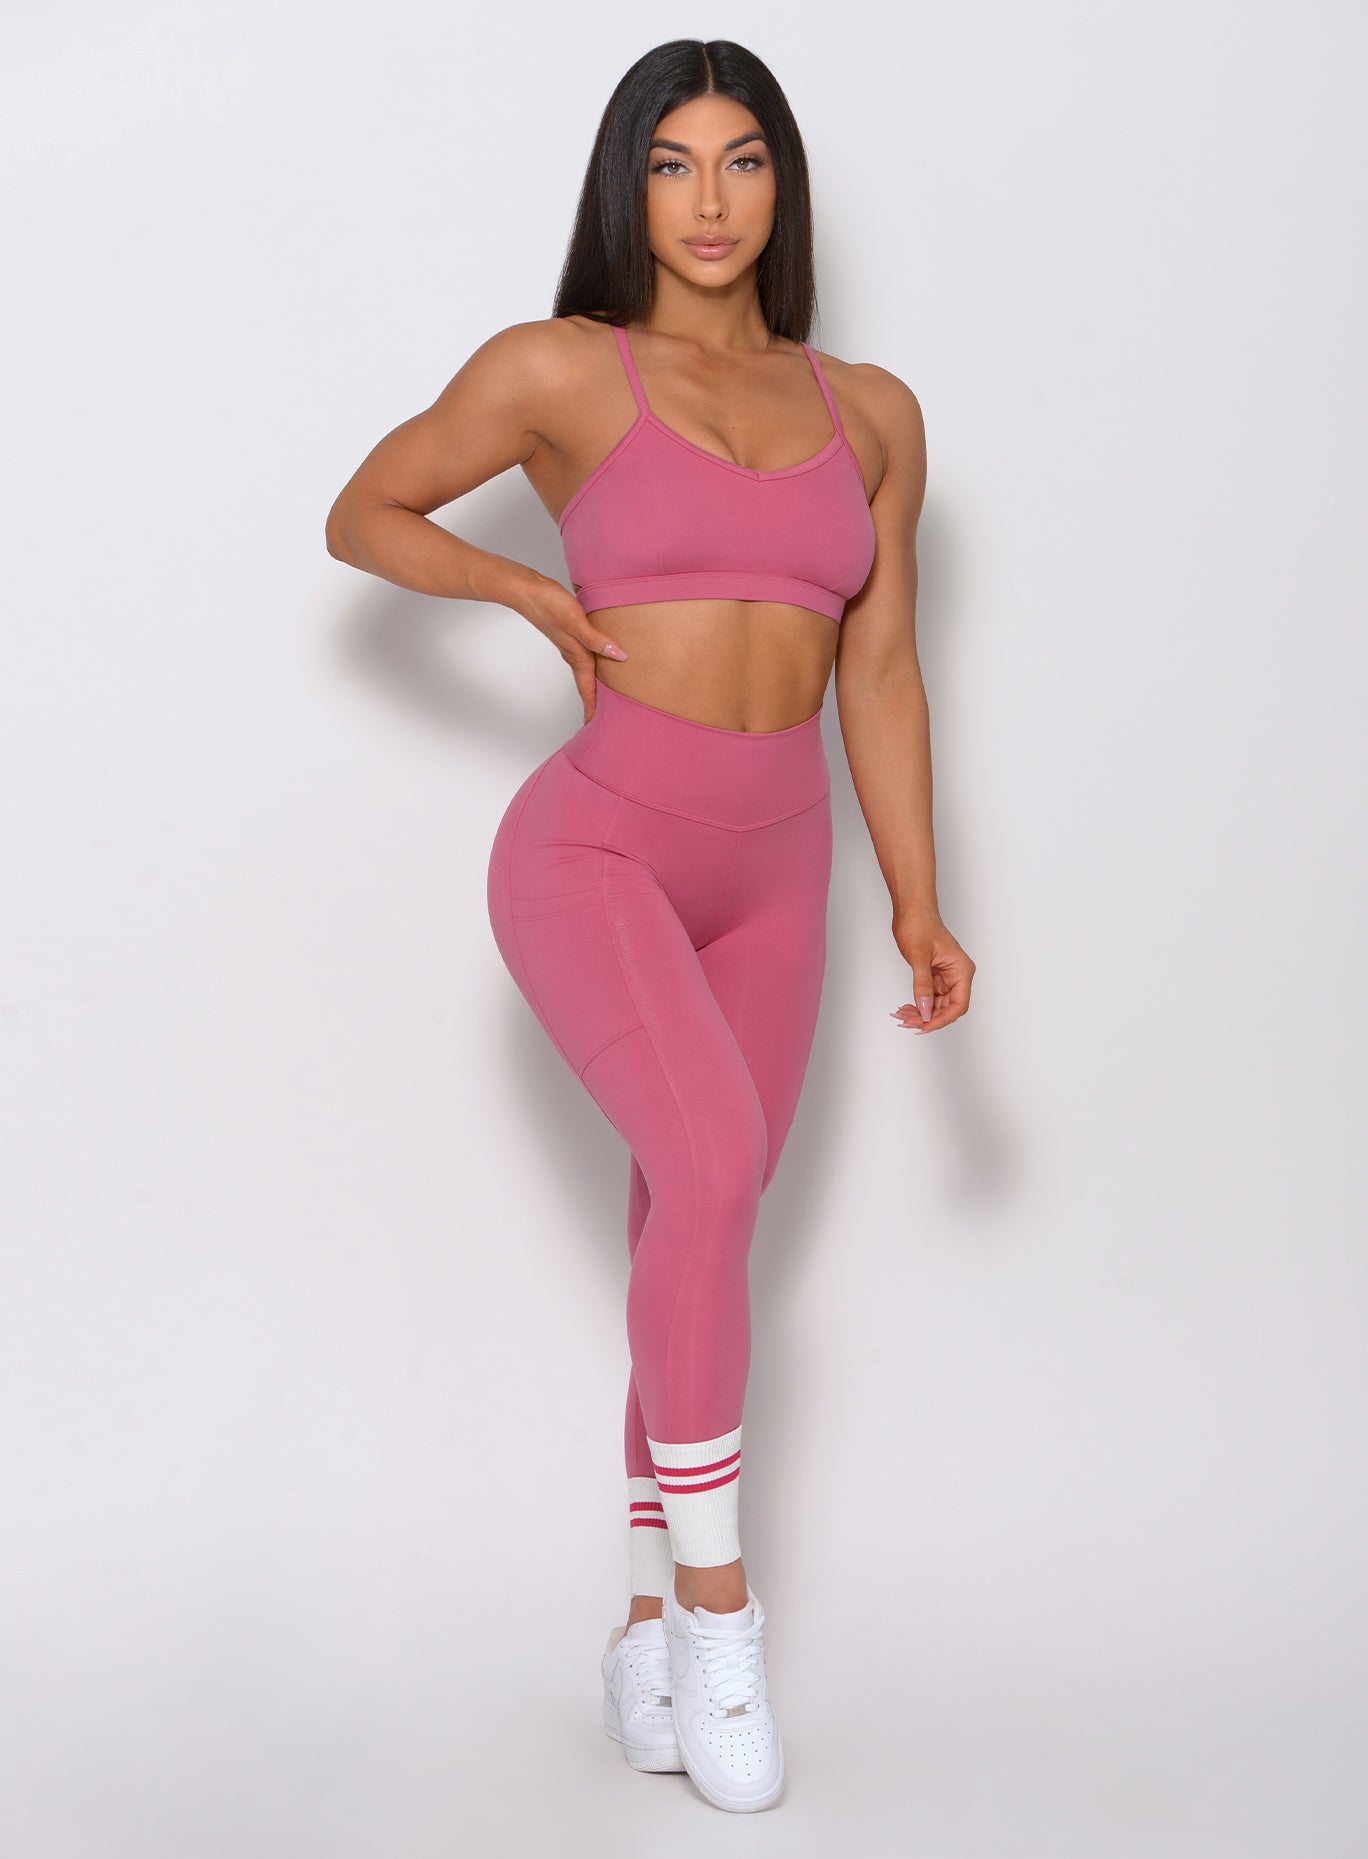 Full front view of the model wearing our pumped sports bra in blush color and a matching high waist leggings